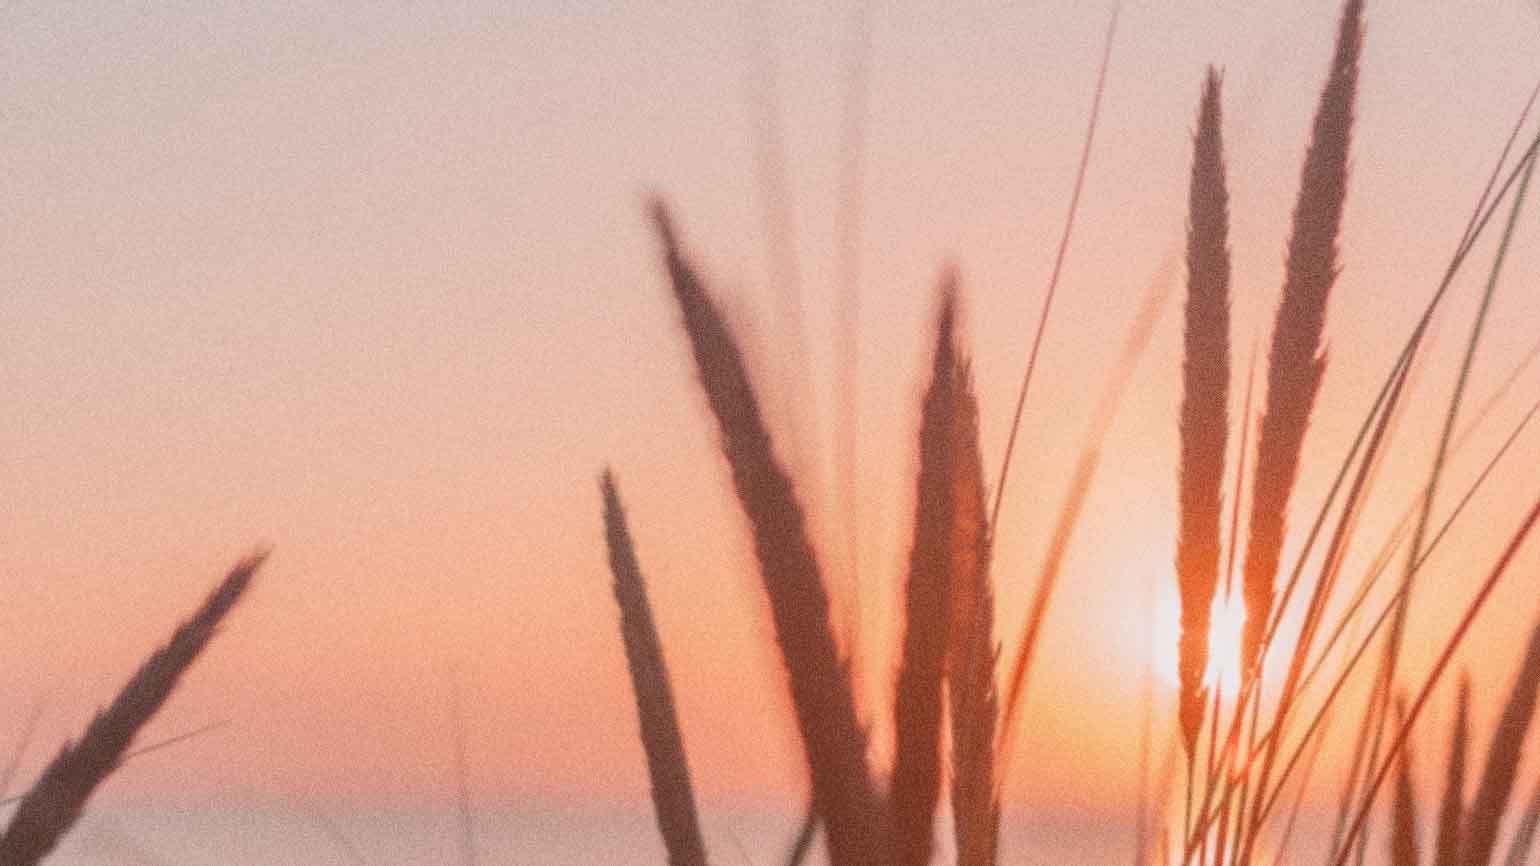 Wheat grass behind a sunset to help you discover God's will for your life